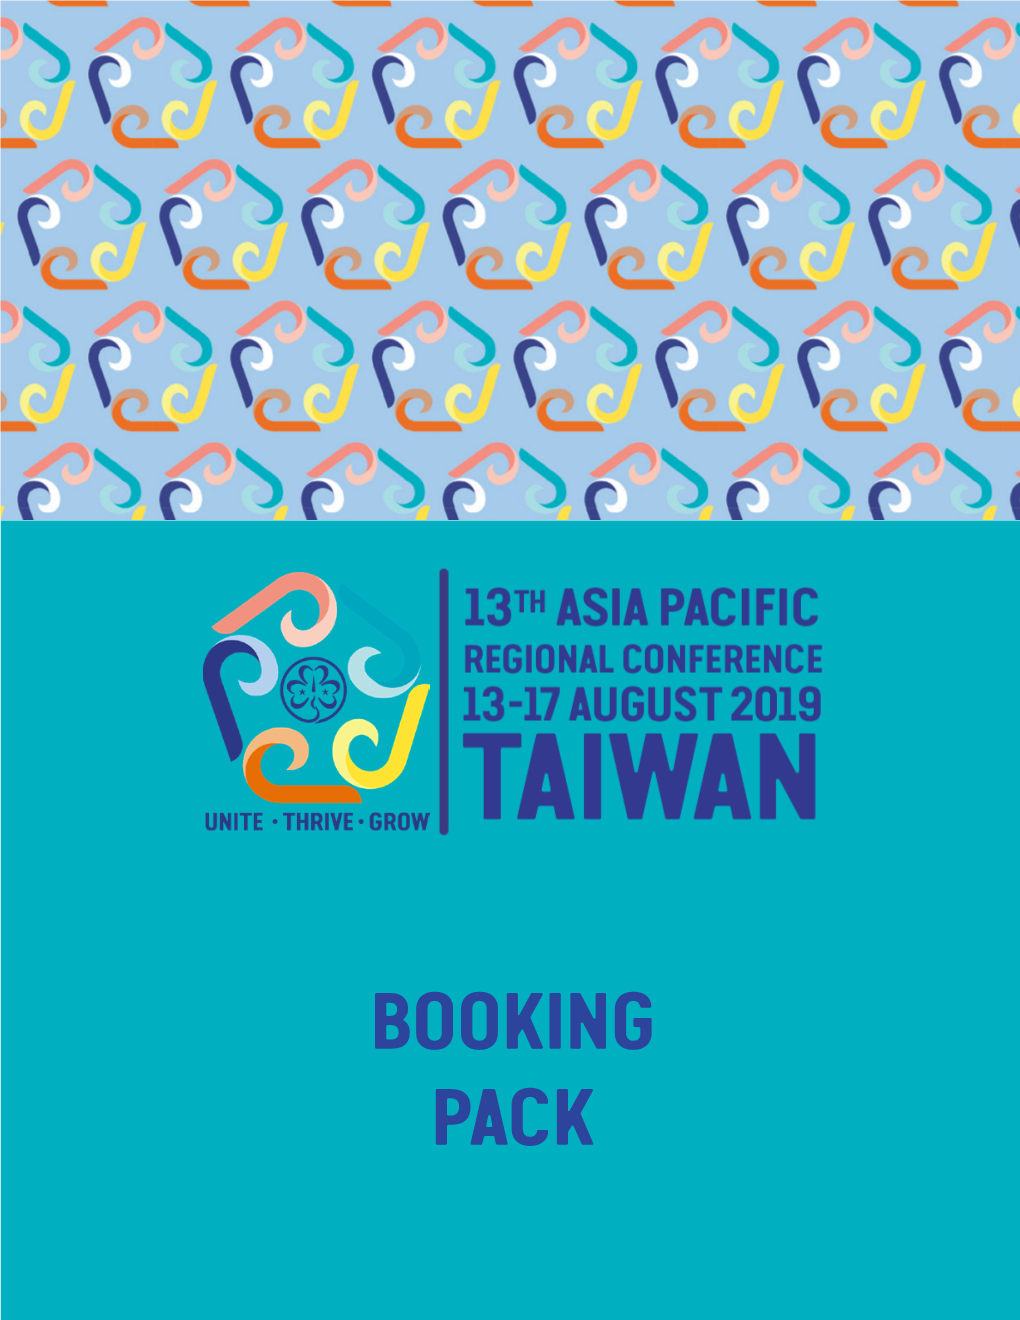 Booking Pack